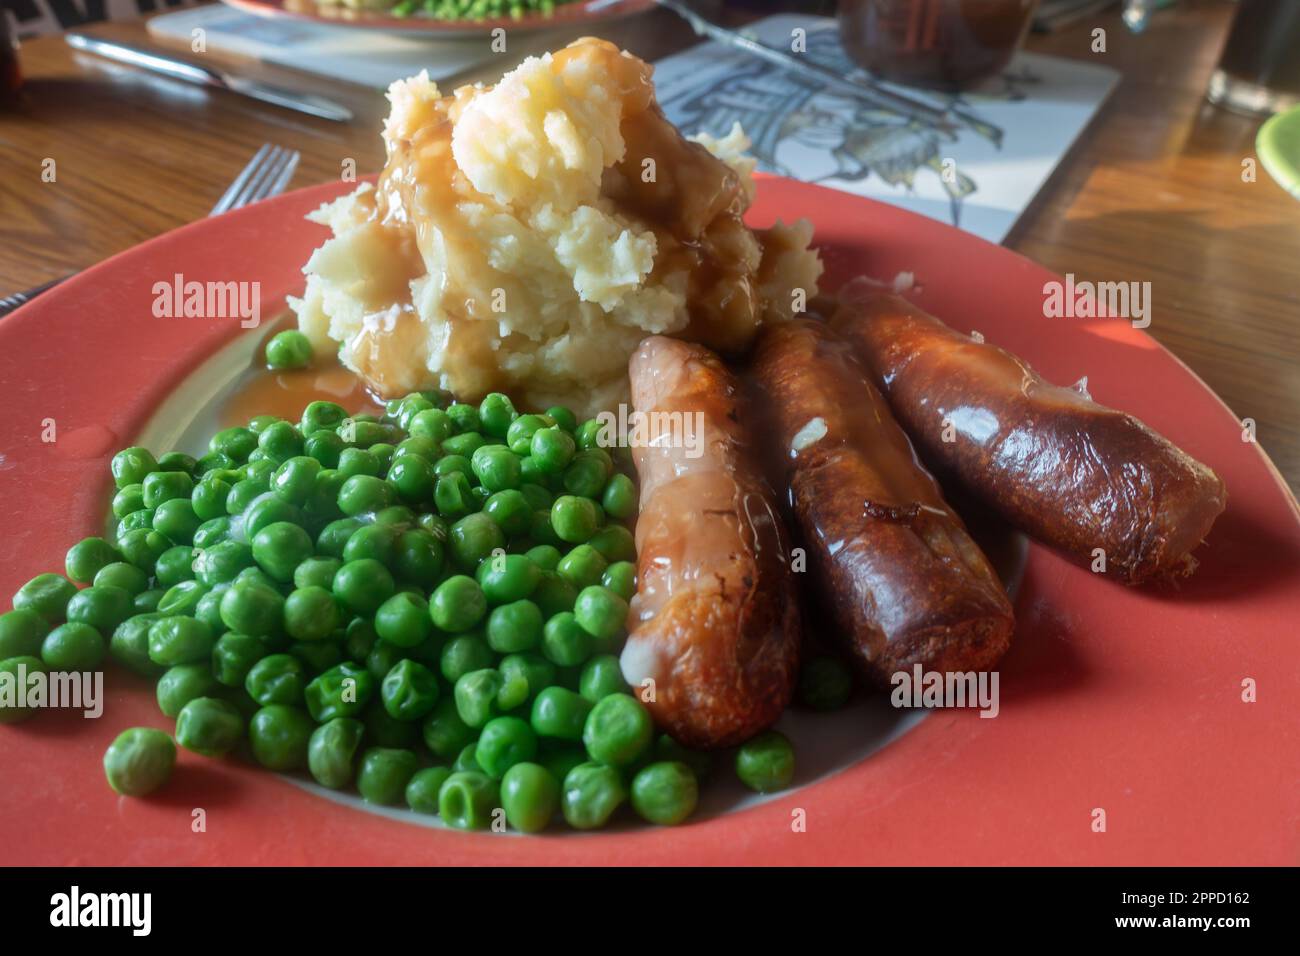 Sausages, mashed potato and peas on a red plate, comfort food for dinner. Stock Photo